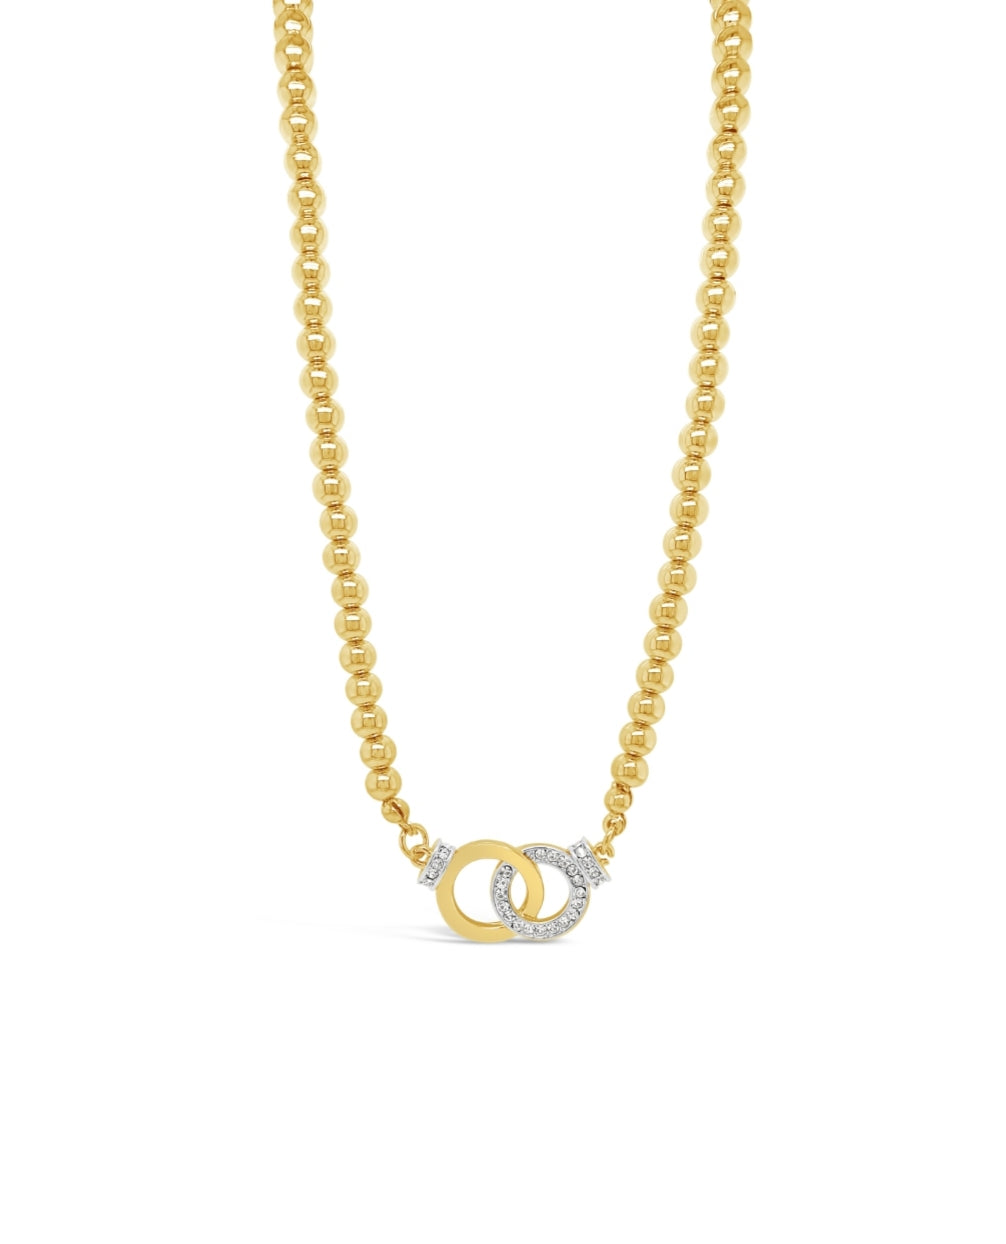 New Yellow Gold Plated Beaded Necklace With Entwined Rings